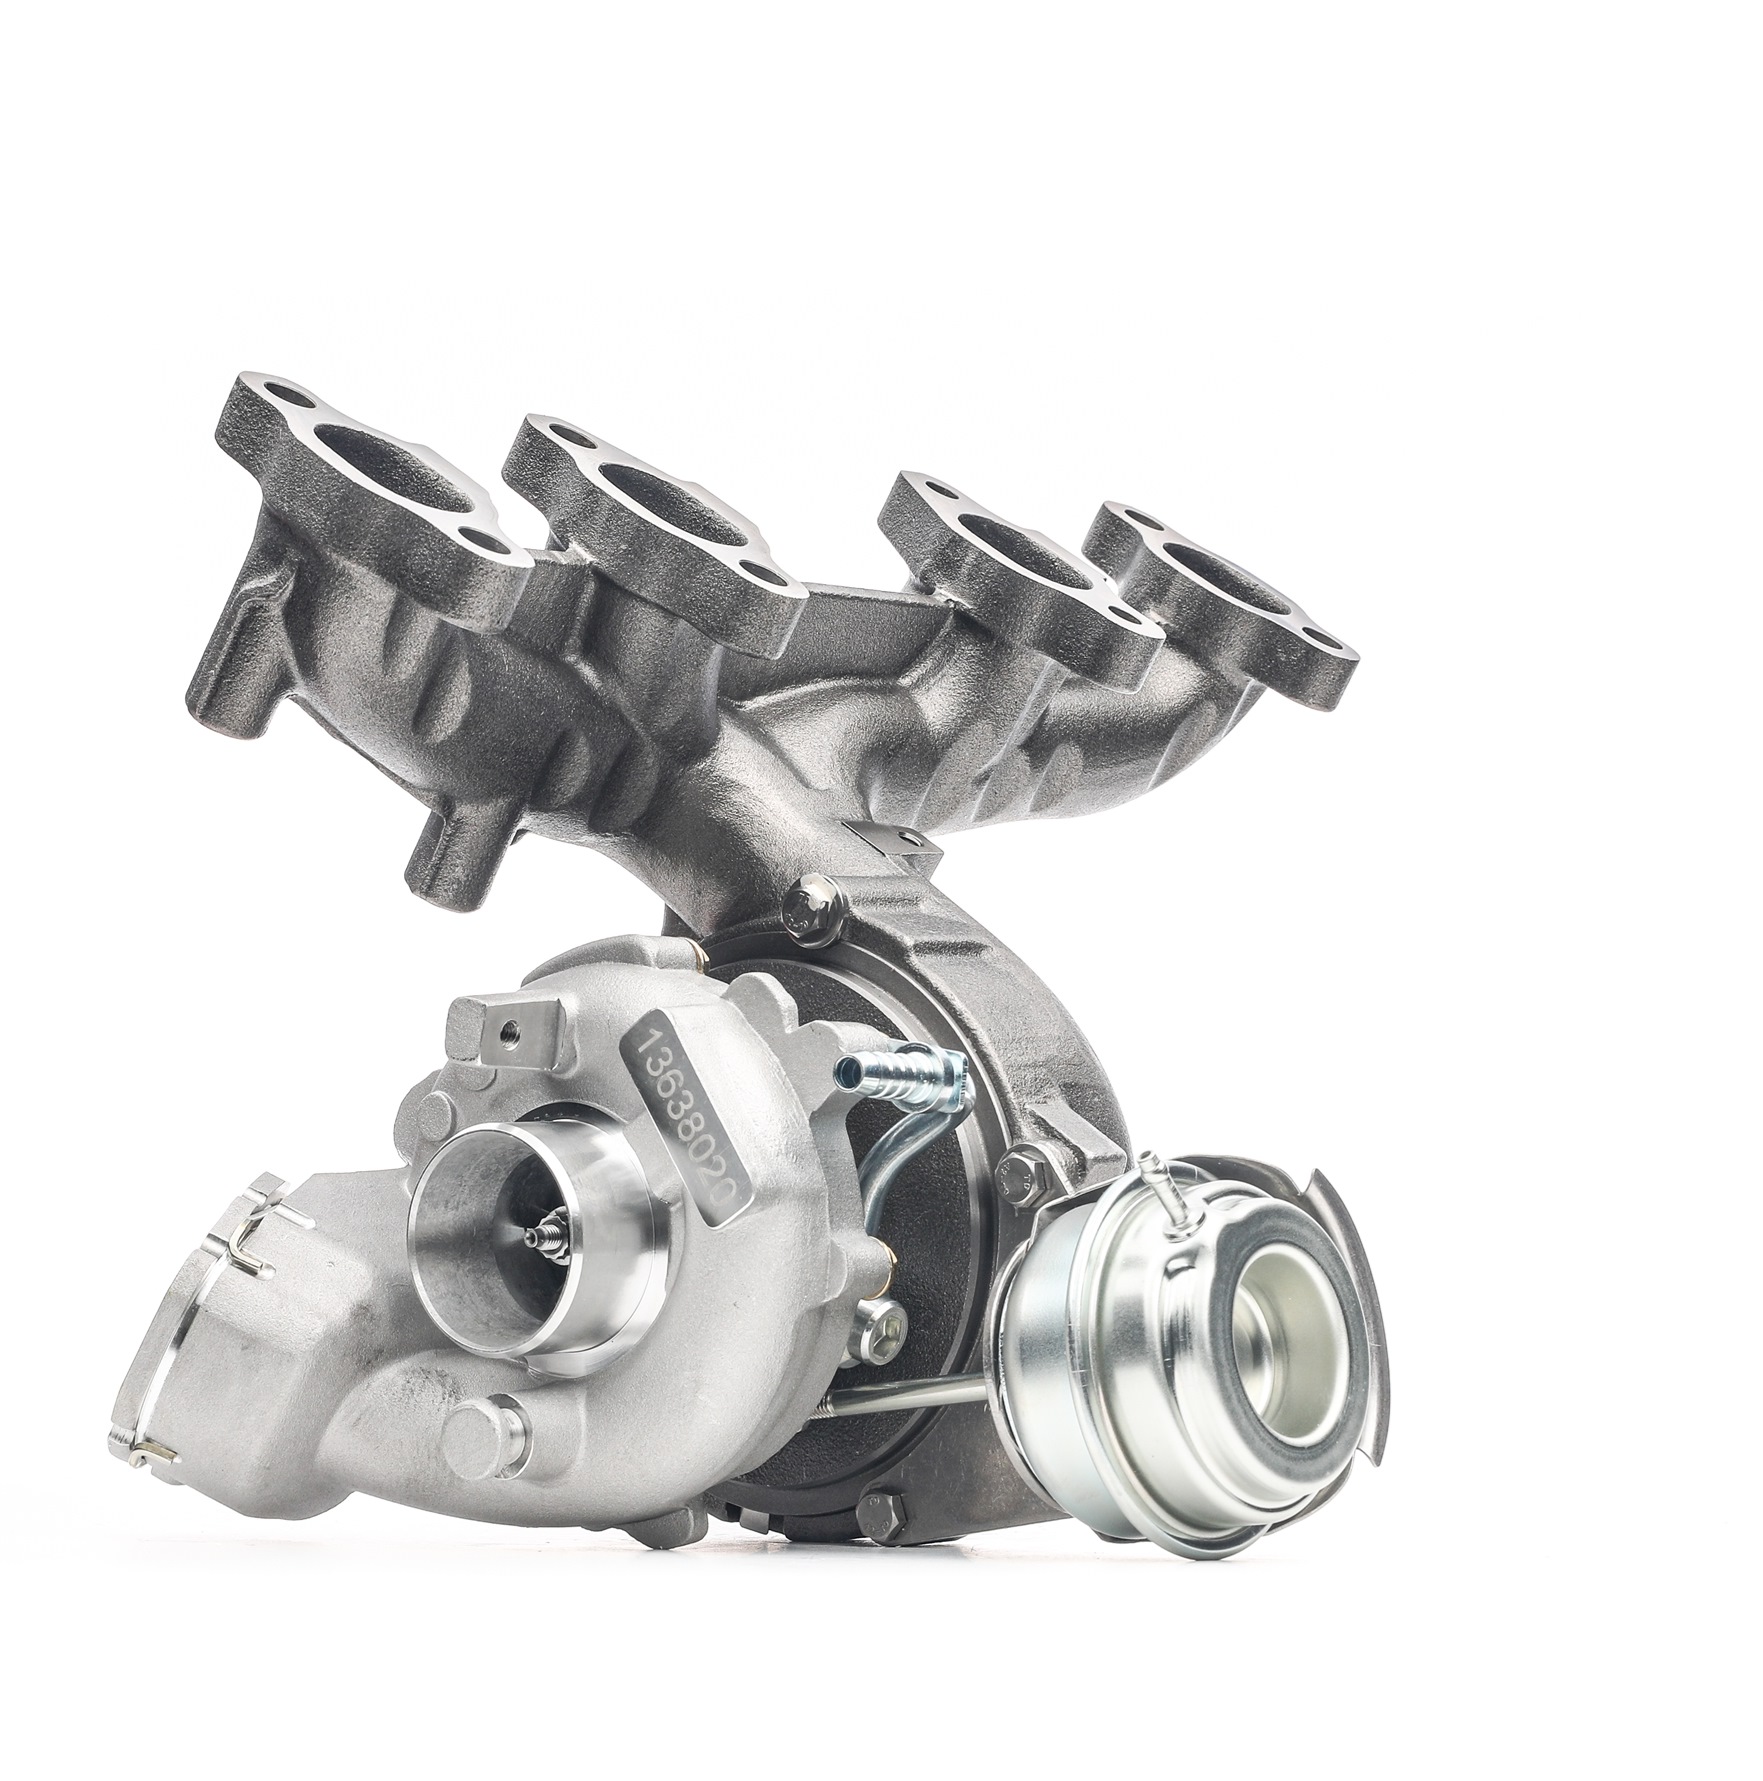 STARK SKCT-1190174 Turbocharger Exhaust Turbocharger, Diesel, Euro 4, Pneumatic, without attachment material